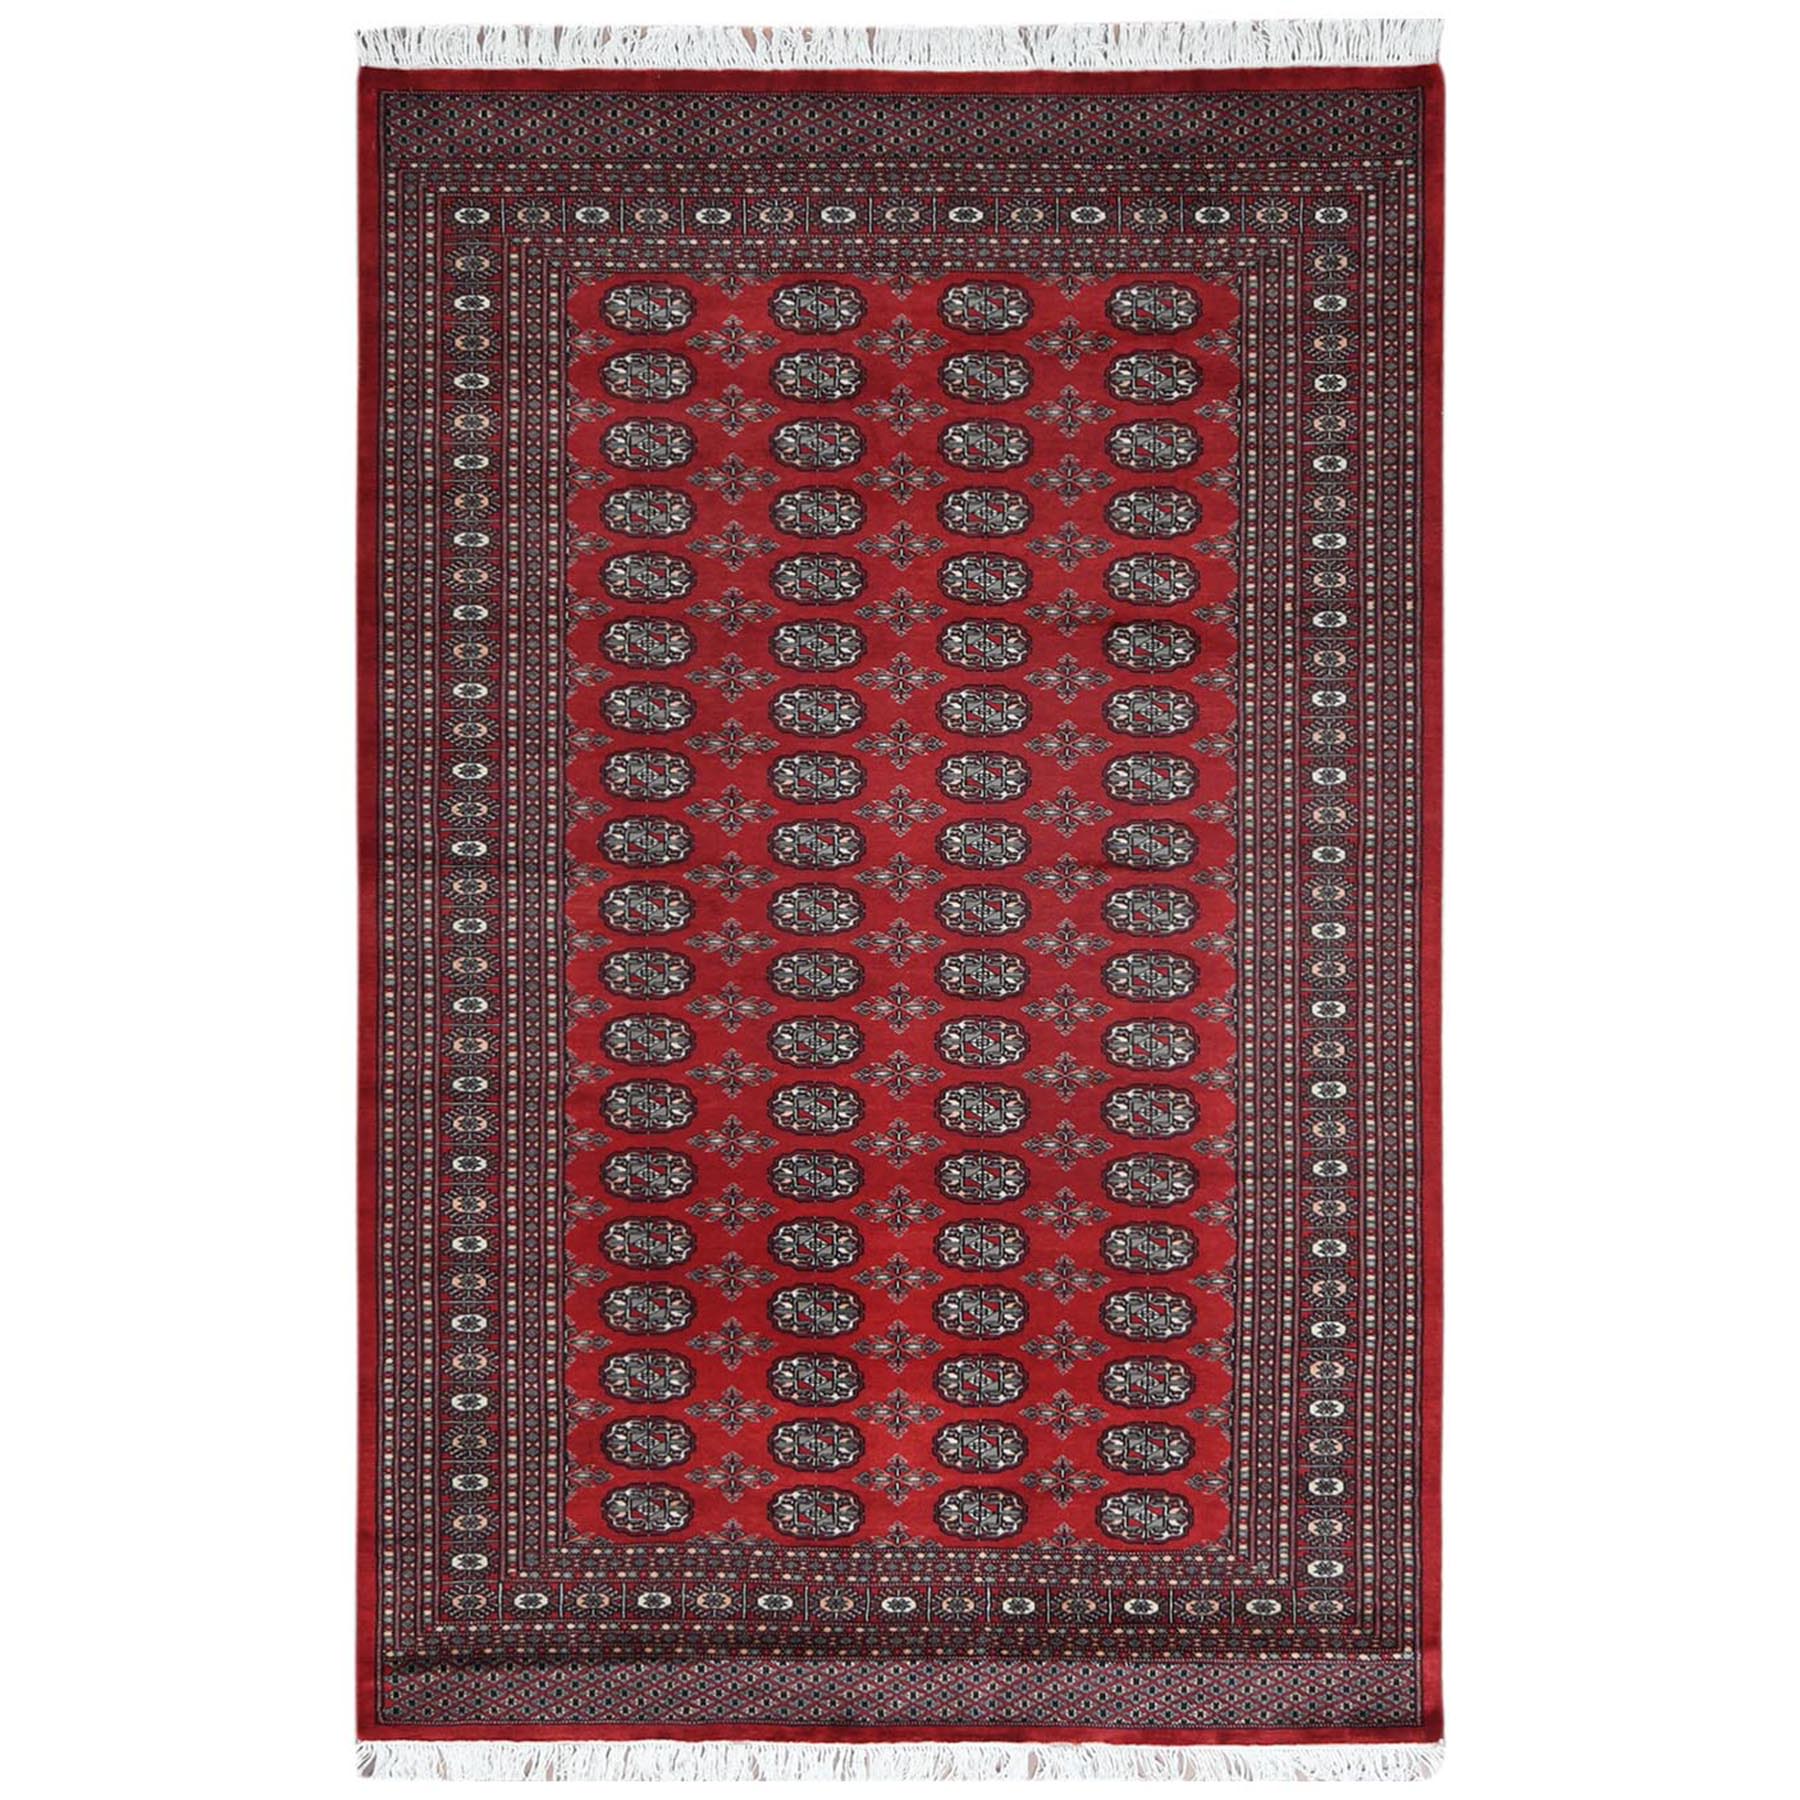 Nomadic And Village Collection Hand Knotted Red Rug No: 1122760